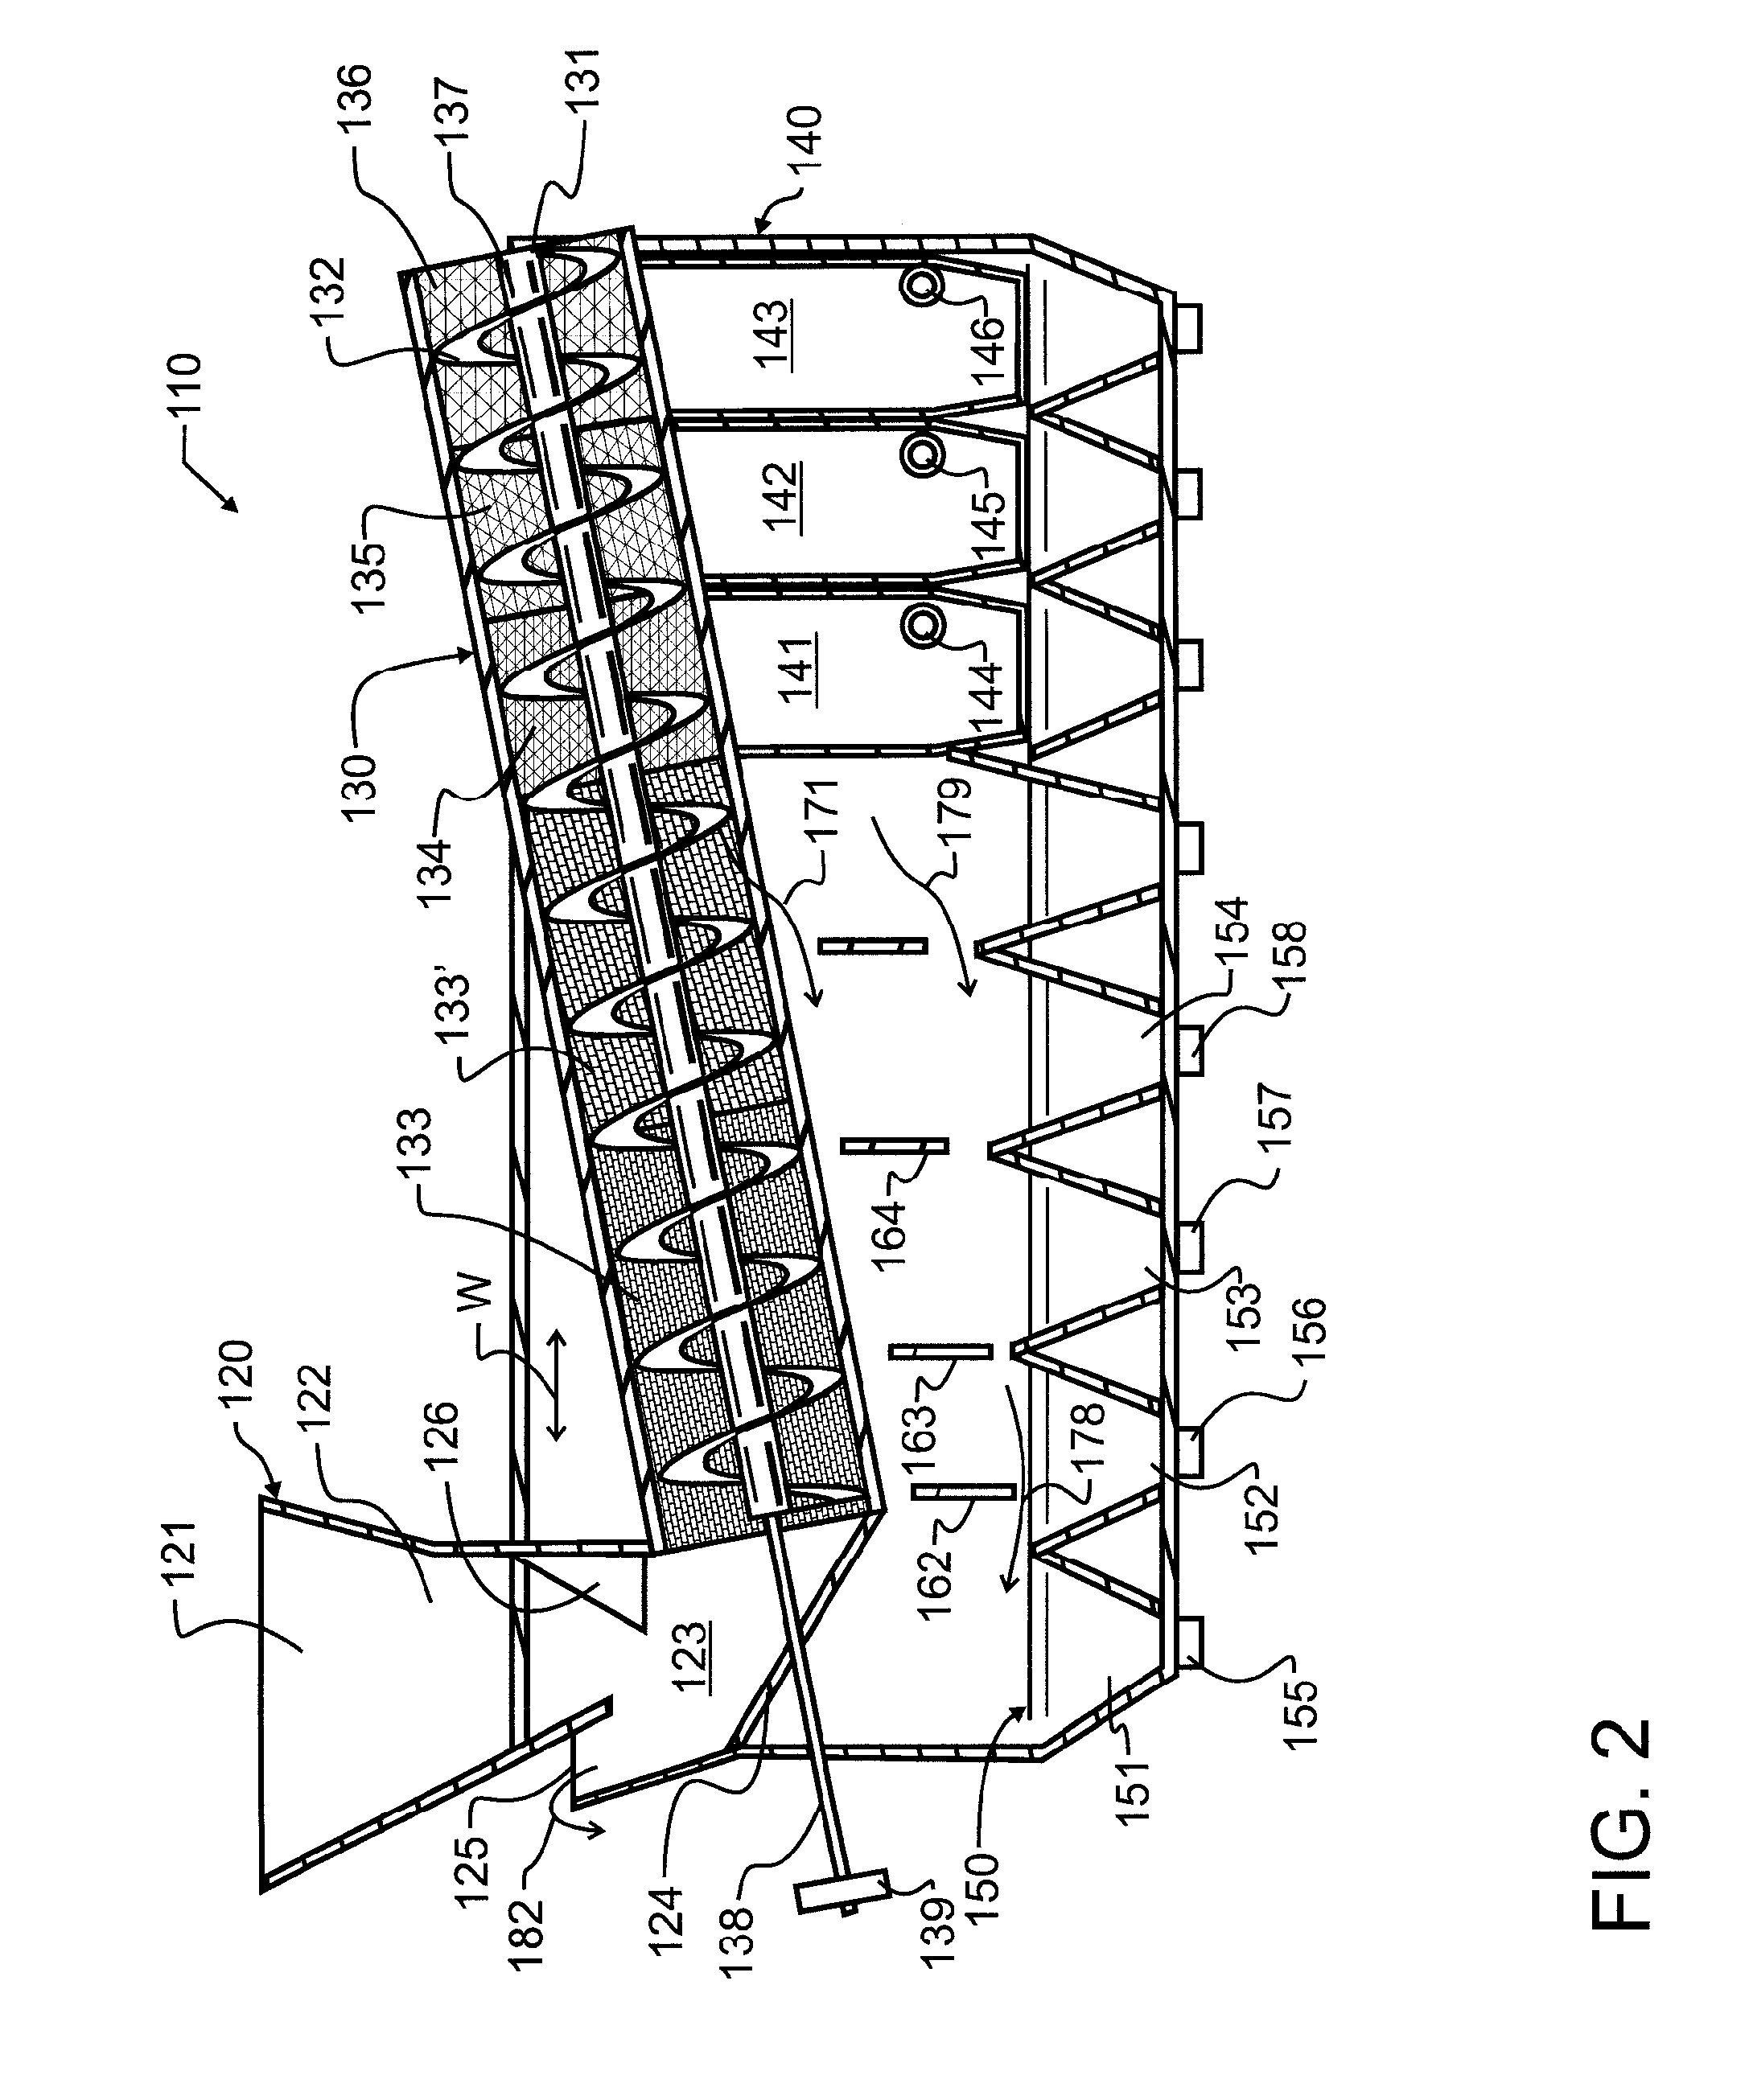 Rotary aggregate washing and classification system